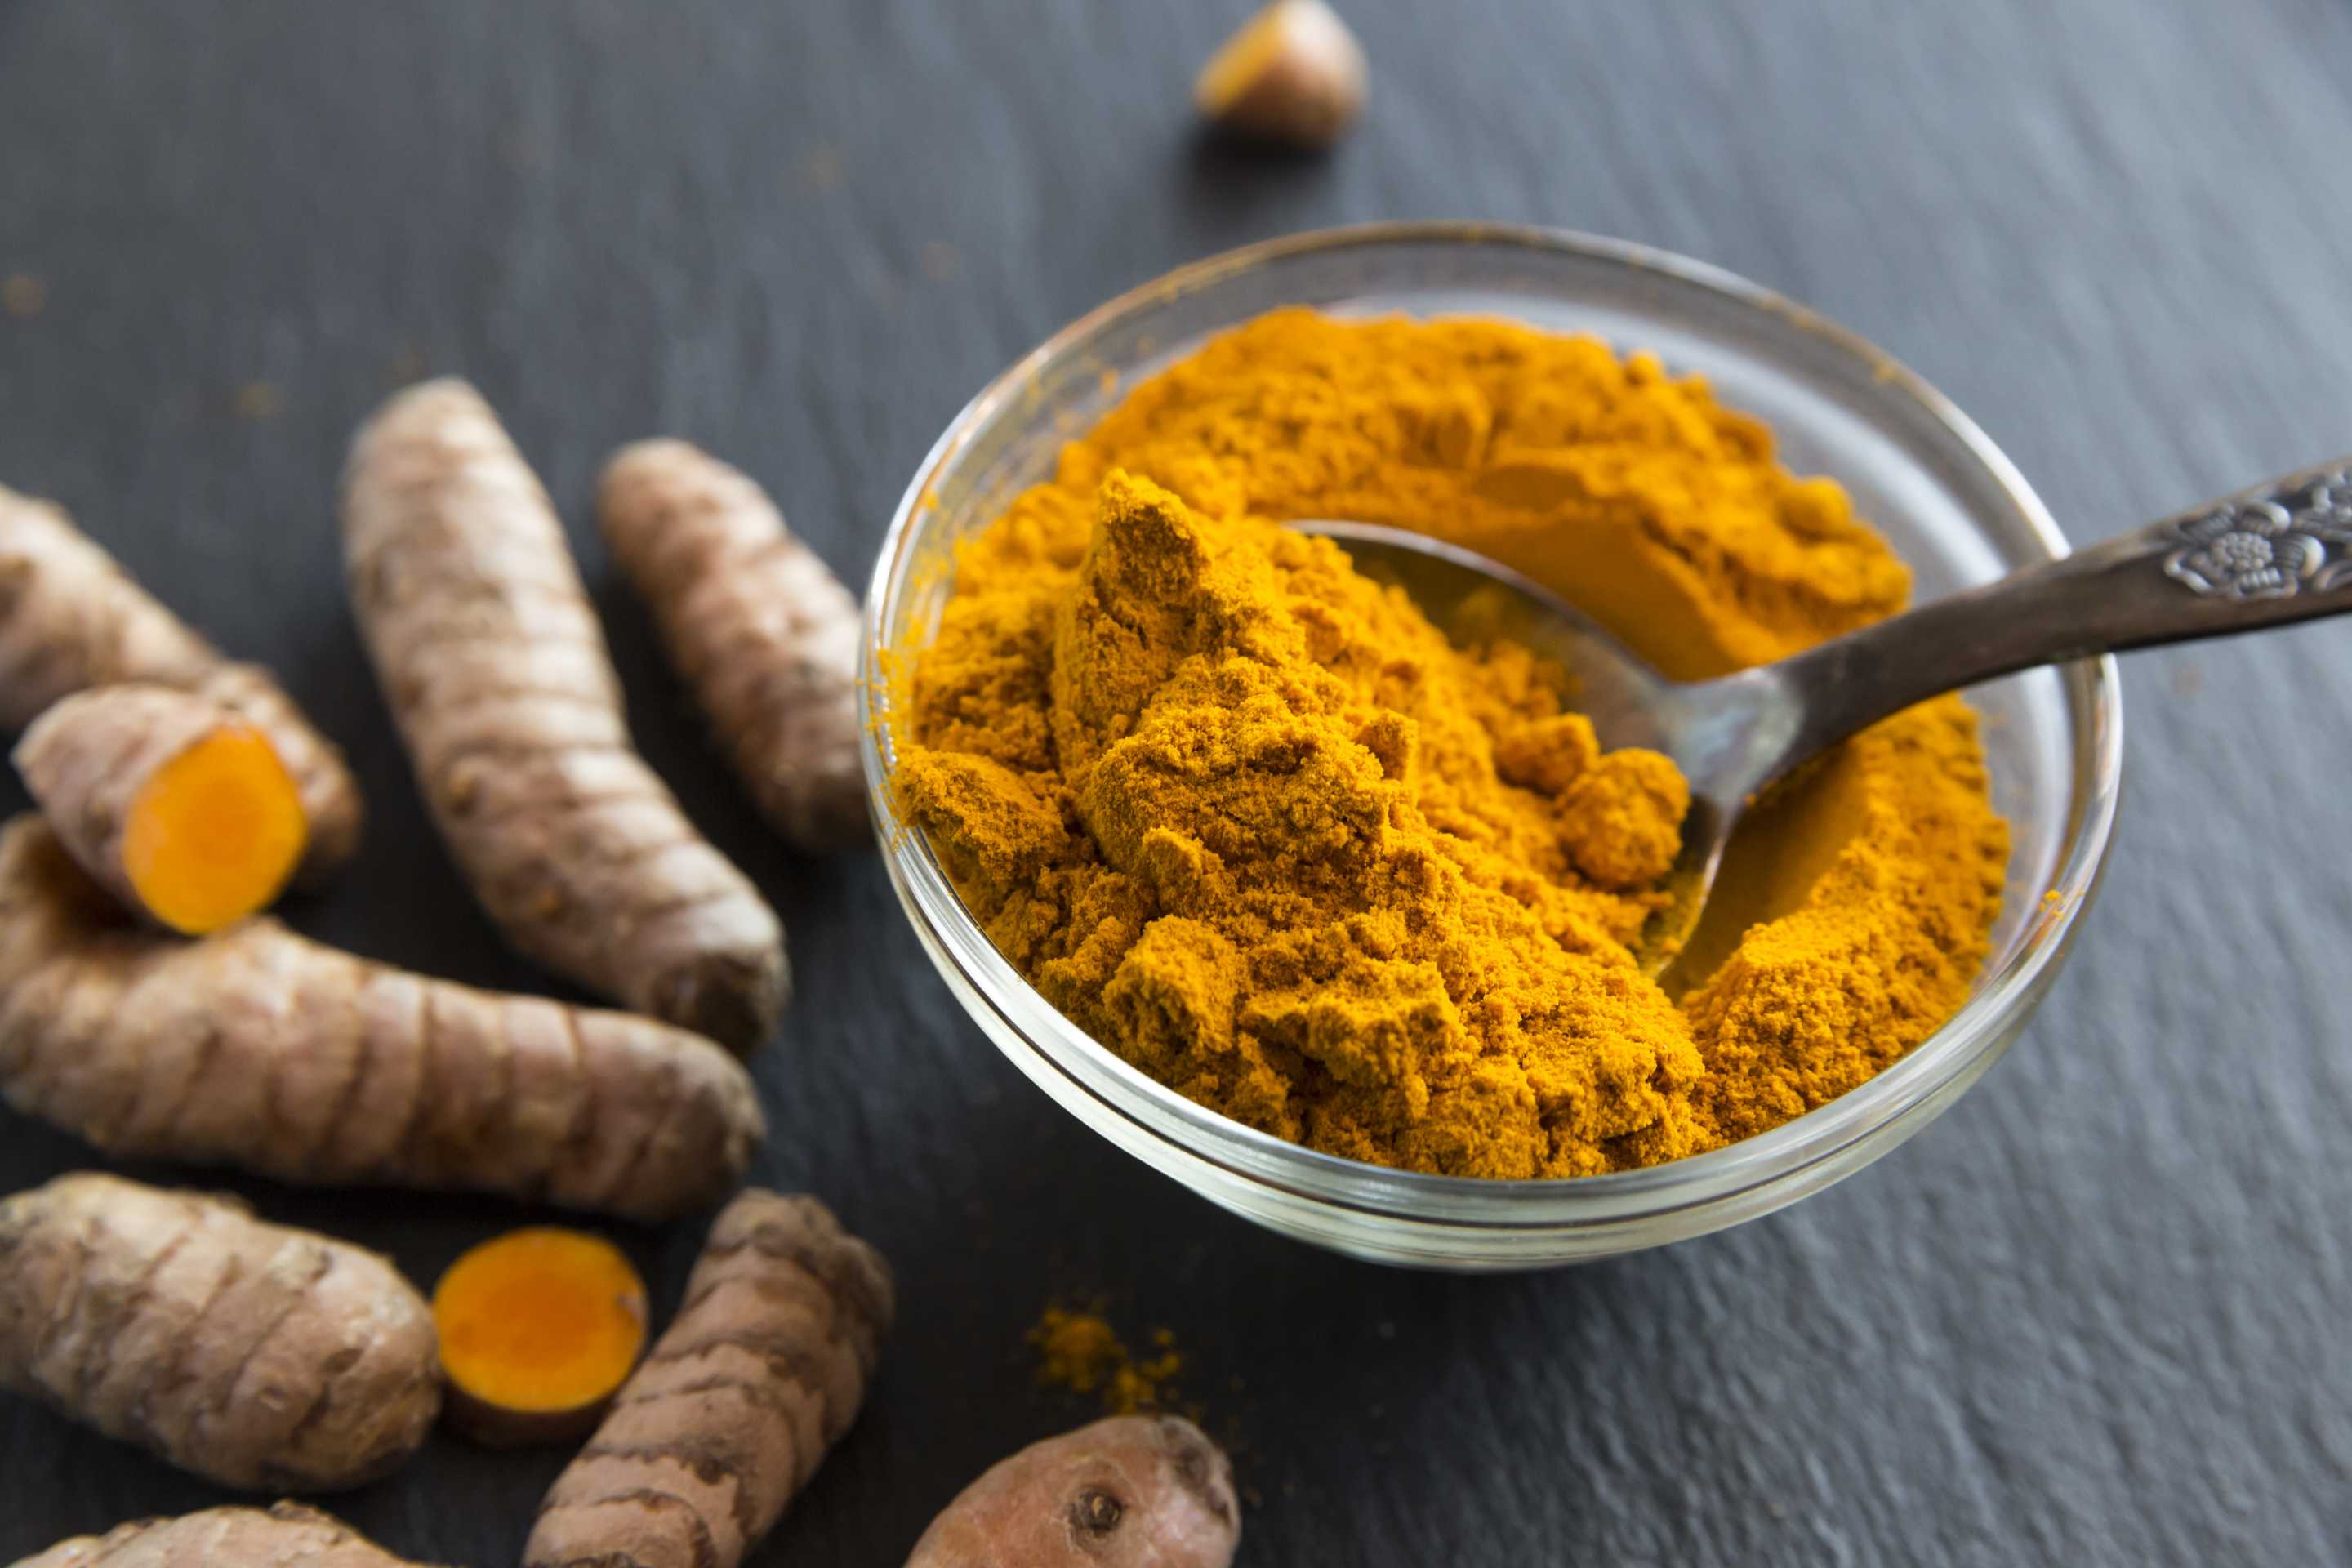 microsoft, professional faqs: can turmeric cause constipation?